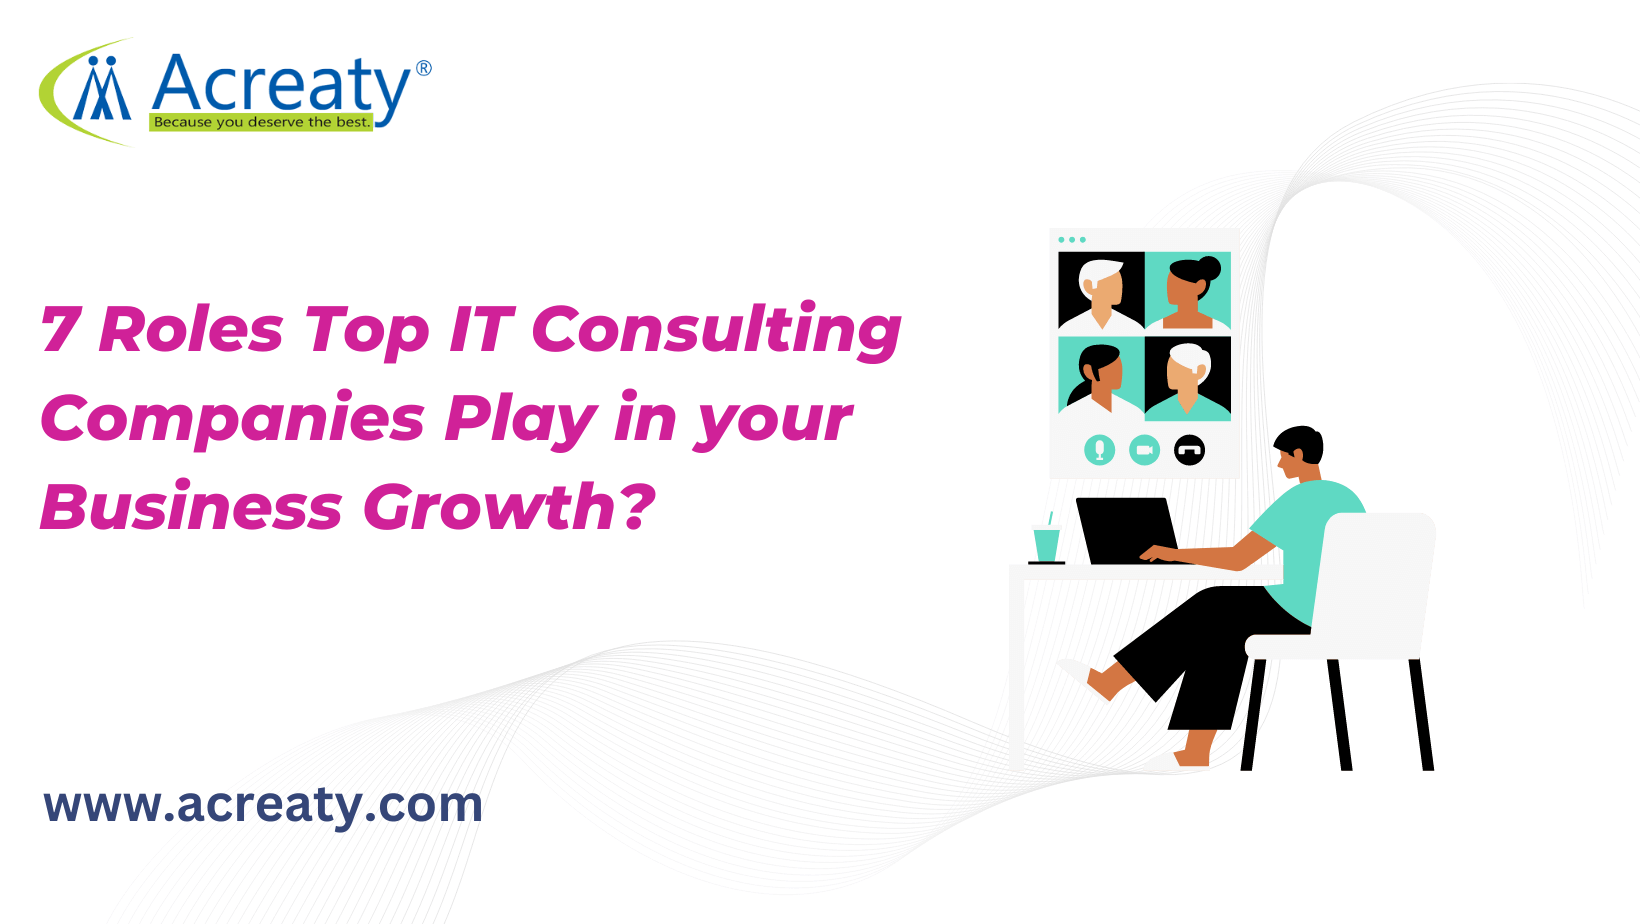 7 Roles Top IT Consulting Companies Play in your Business Growth?